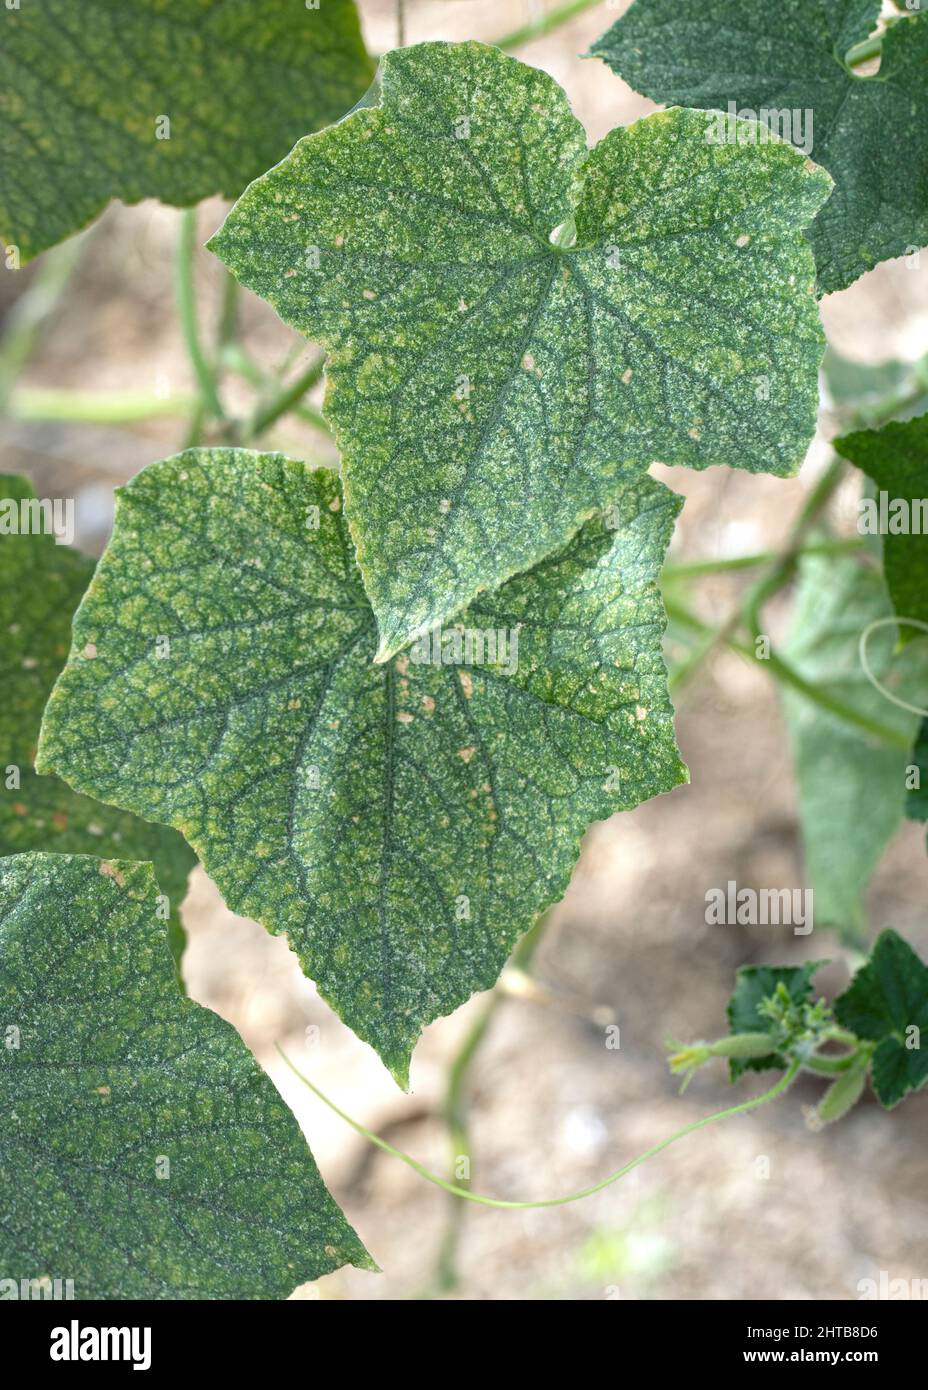 Cucumber leaves affected by spider mites with yellow spots Stock Photo